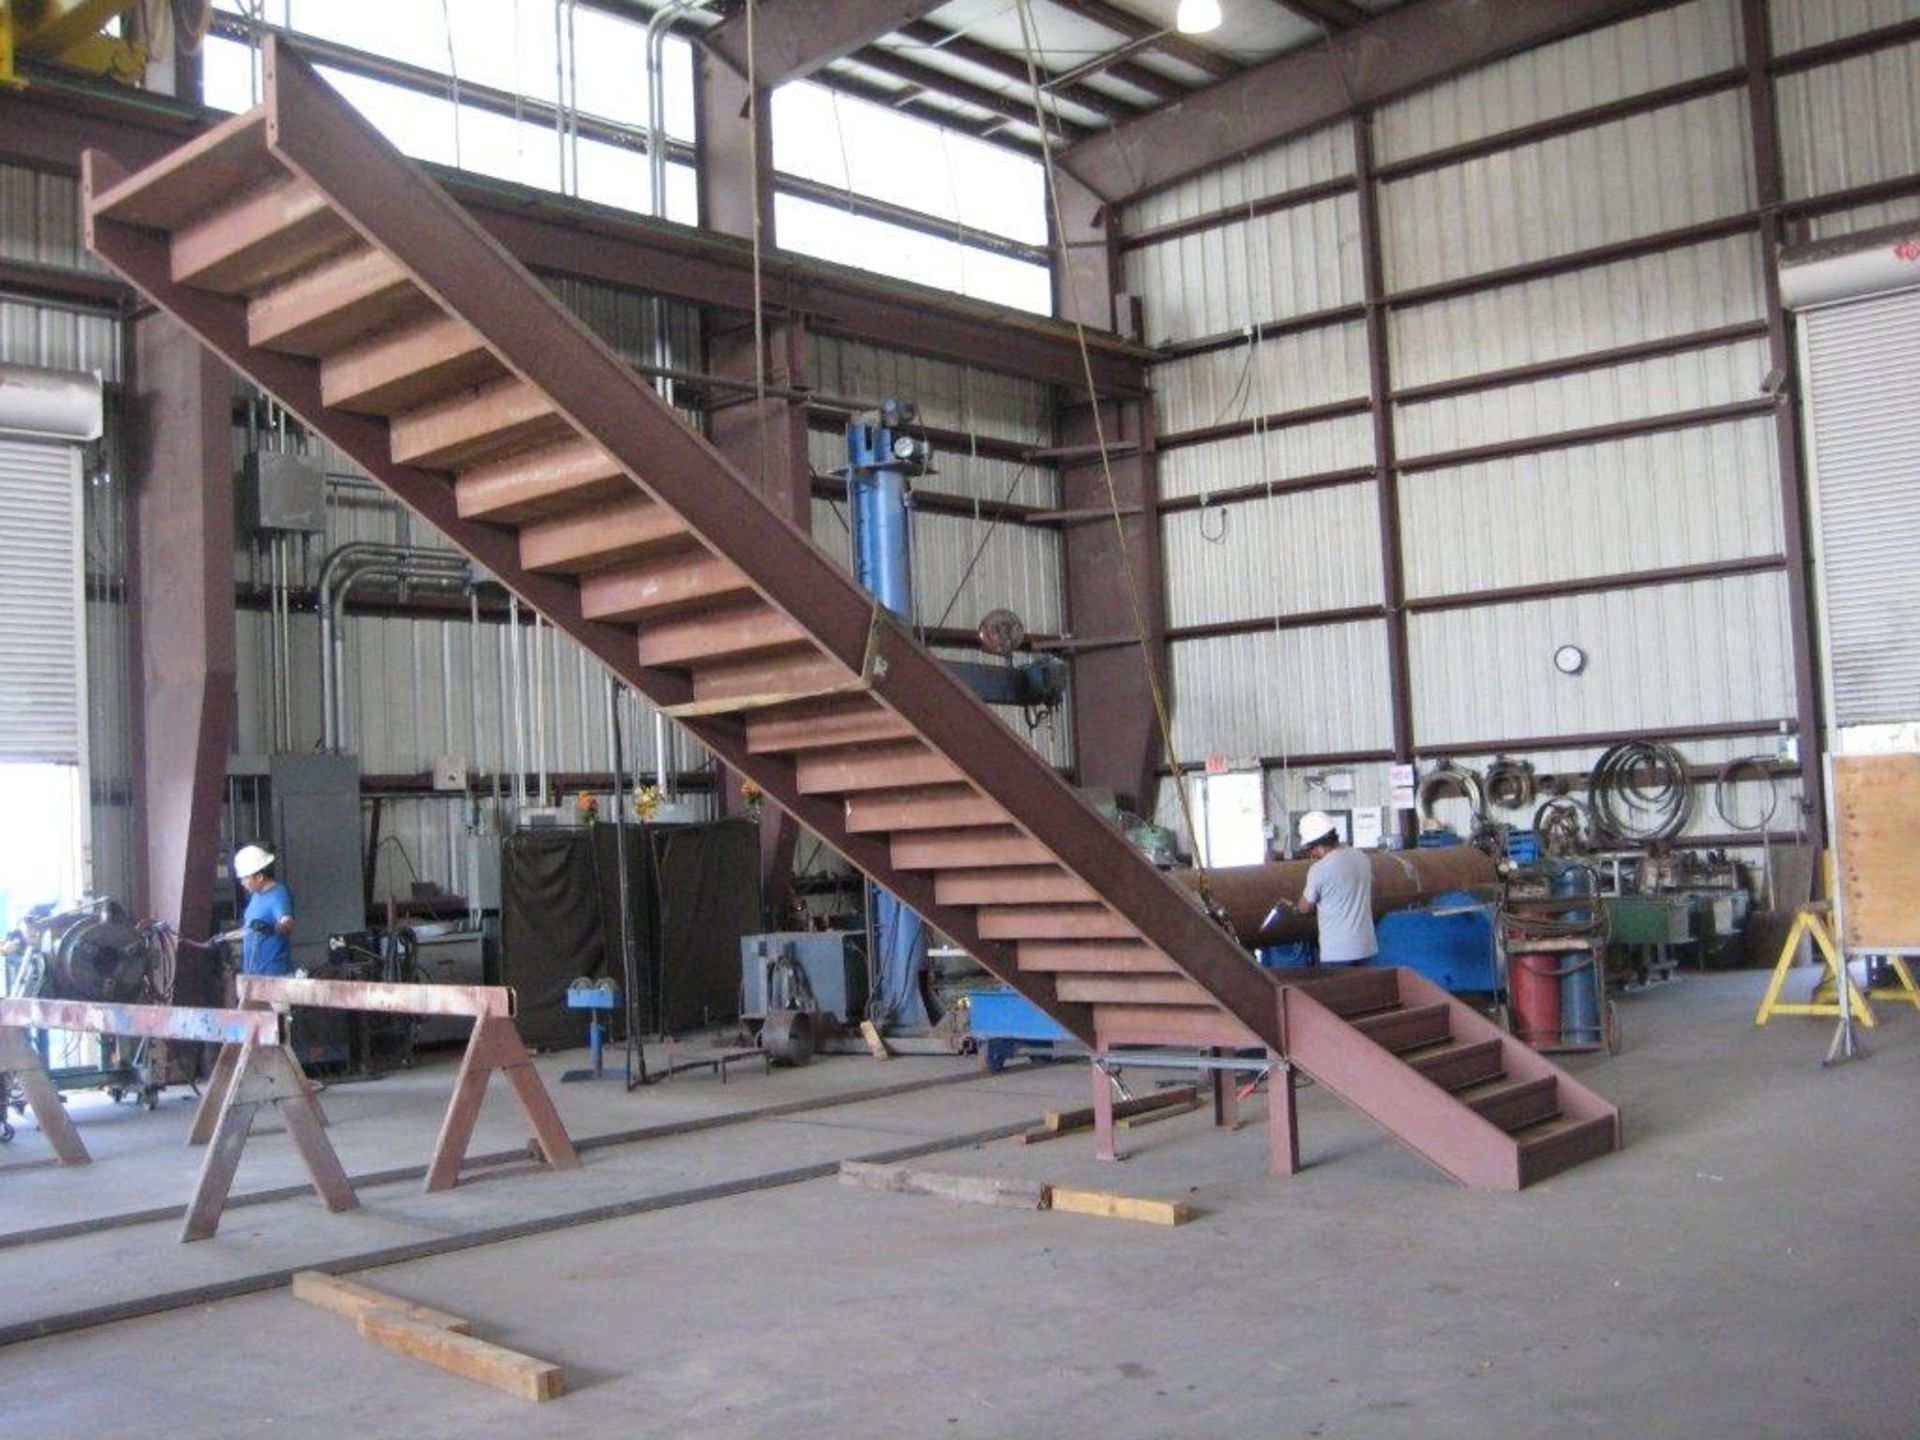 HEAVY STRUCTURAL MEZZANINE, CAN BE USED FOR A SECOND FLOOR IN A WAREHOUSE, COMPLETE NEVER USED - Image 5 of 8